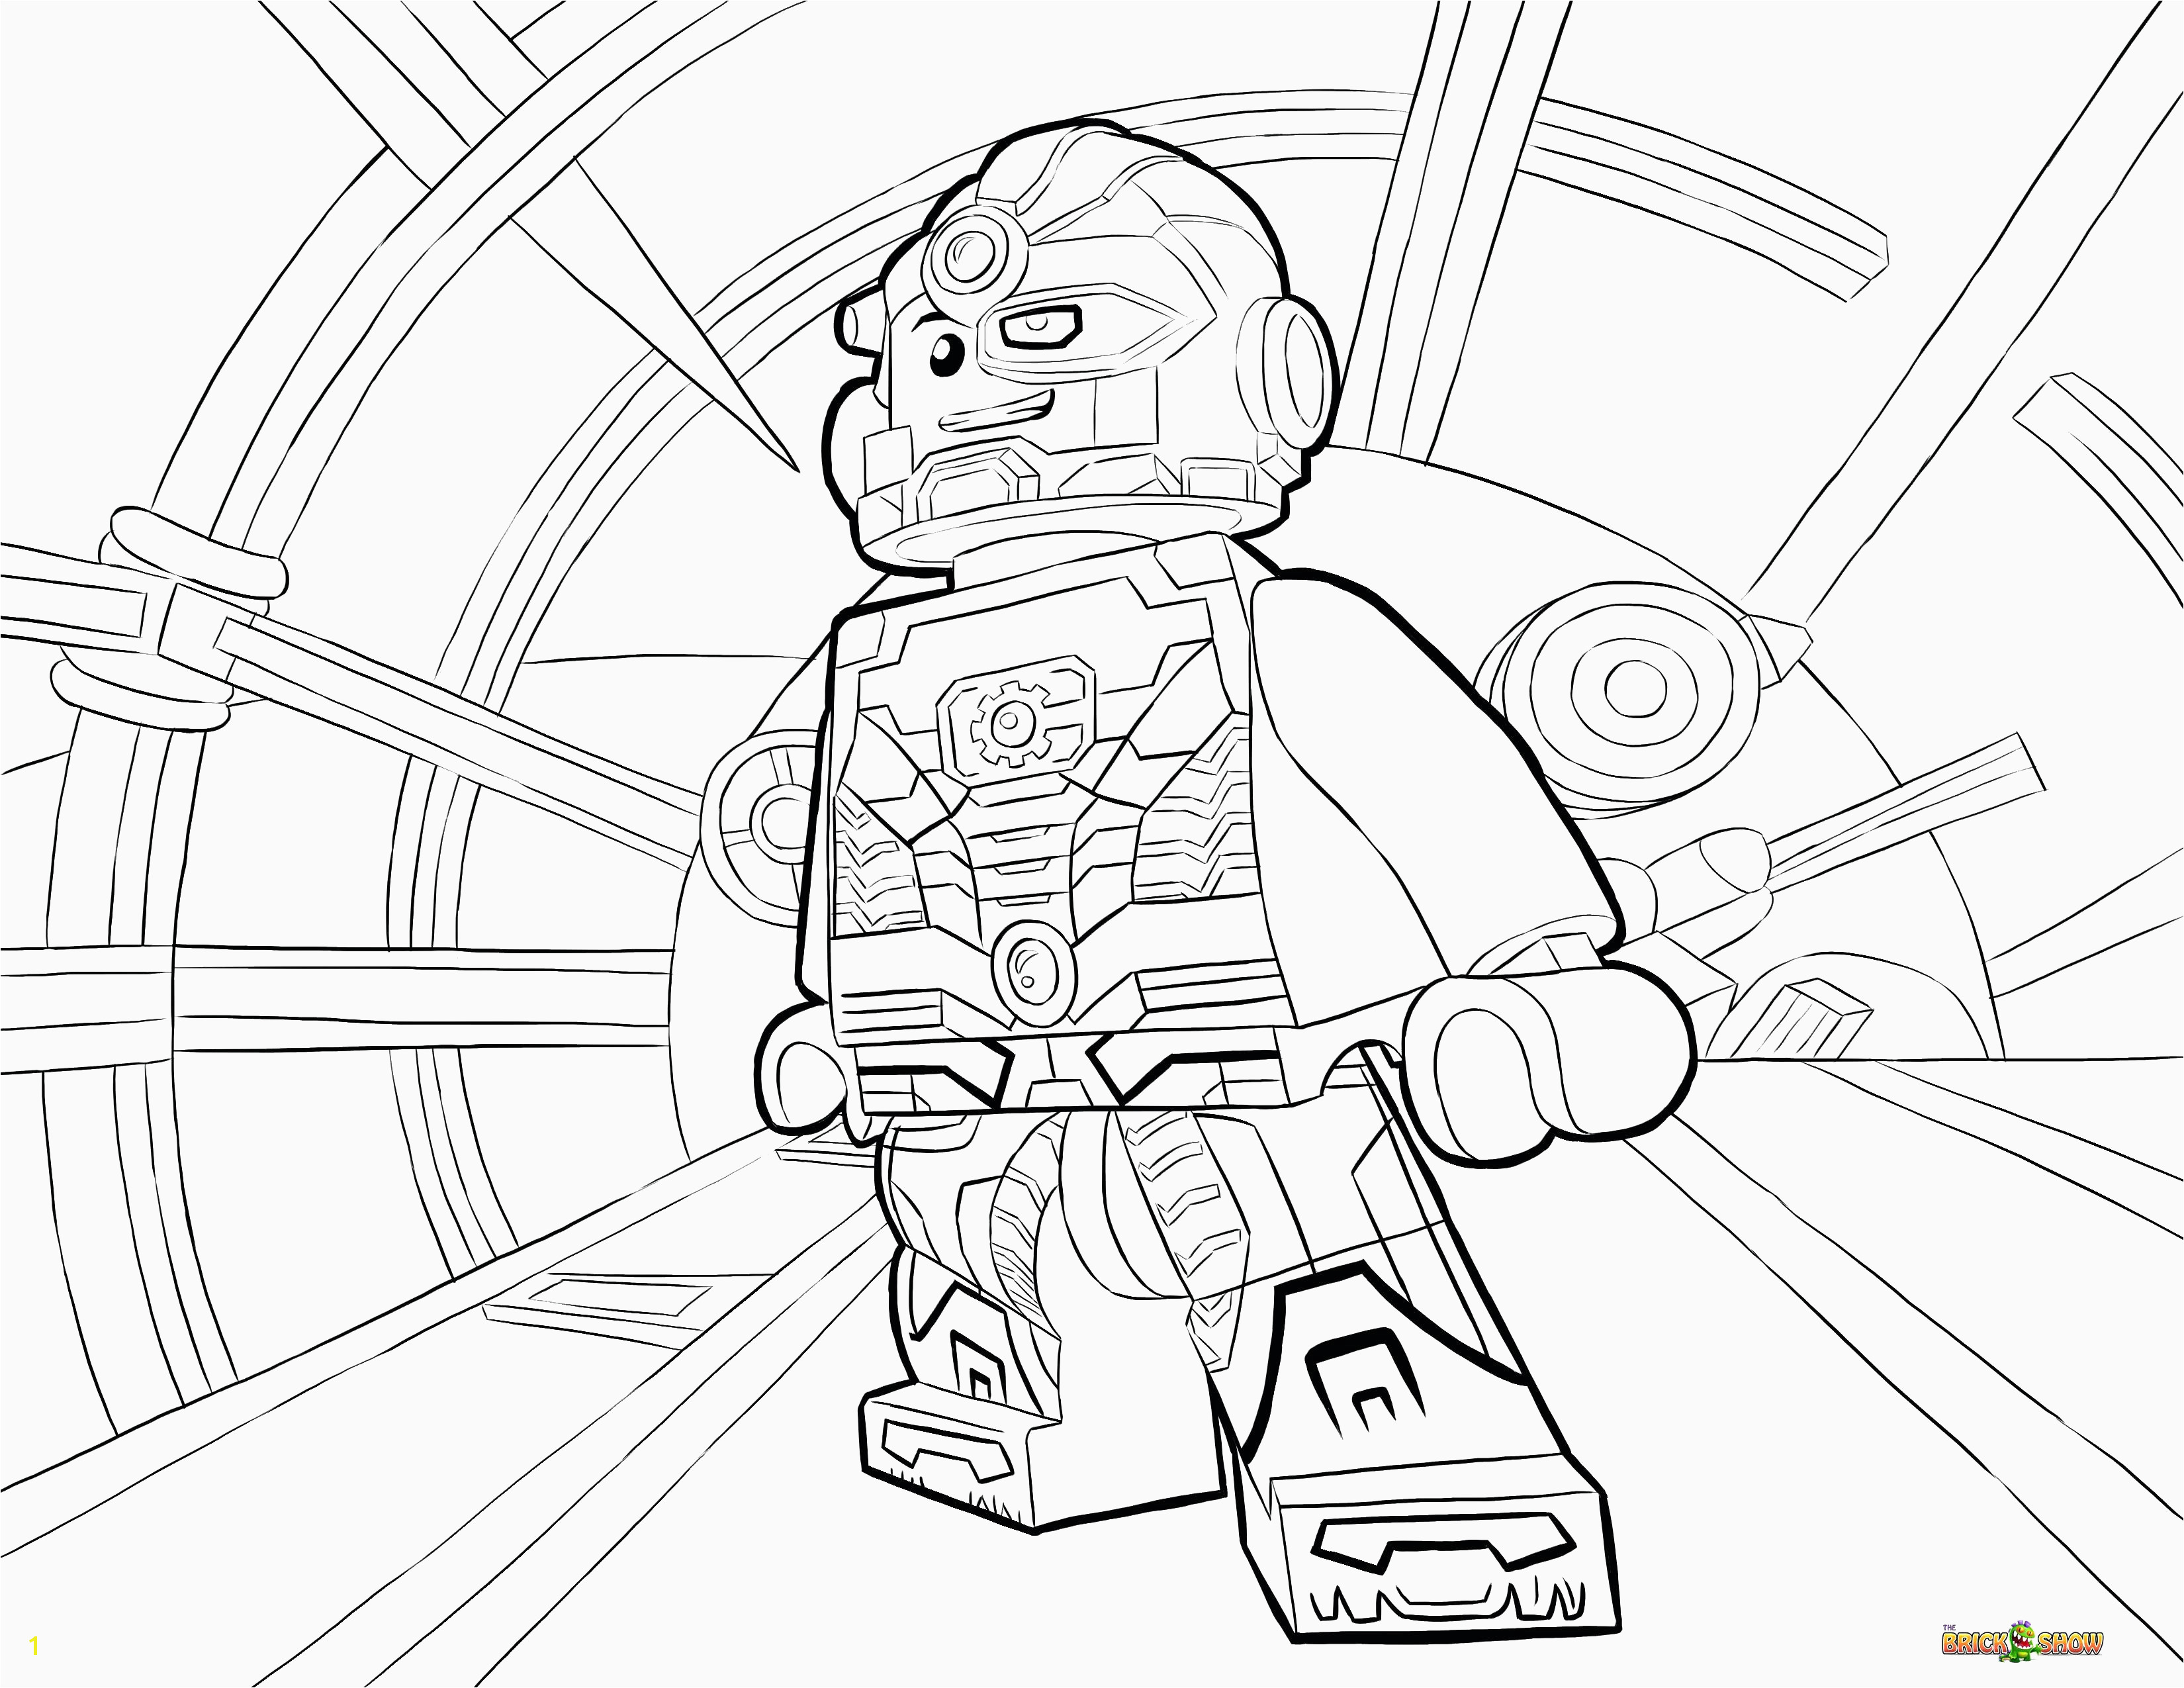 Superhero Coloring Pages Coloring Pages Terrific Superhero Coloring Pages Free Free Lego Superhero Coloring Pages